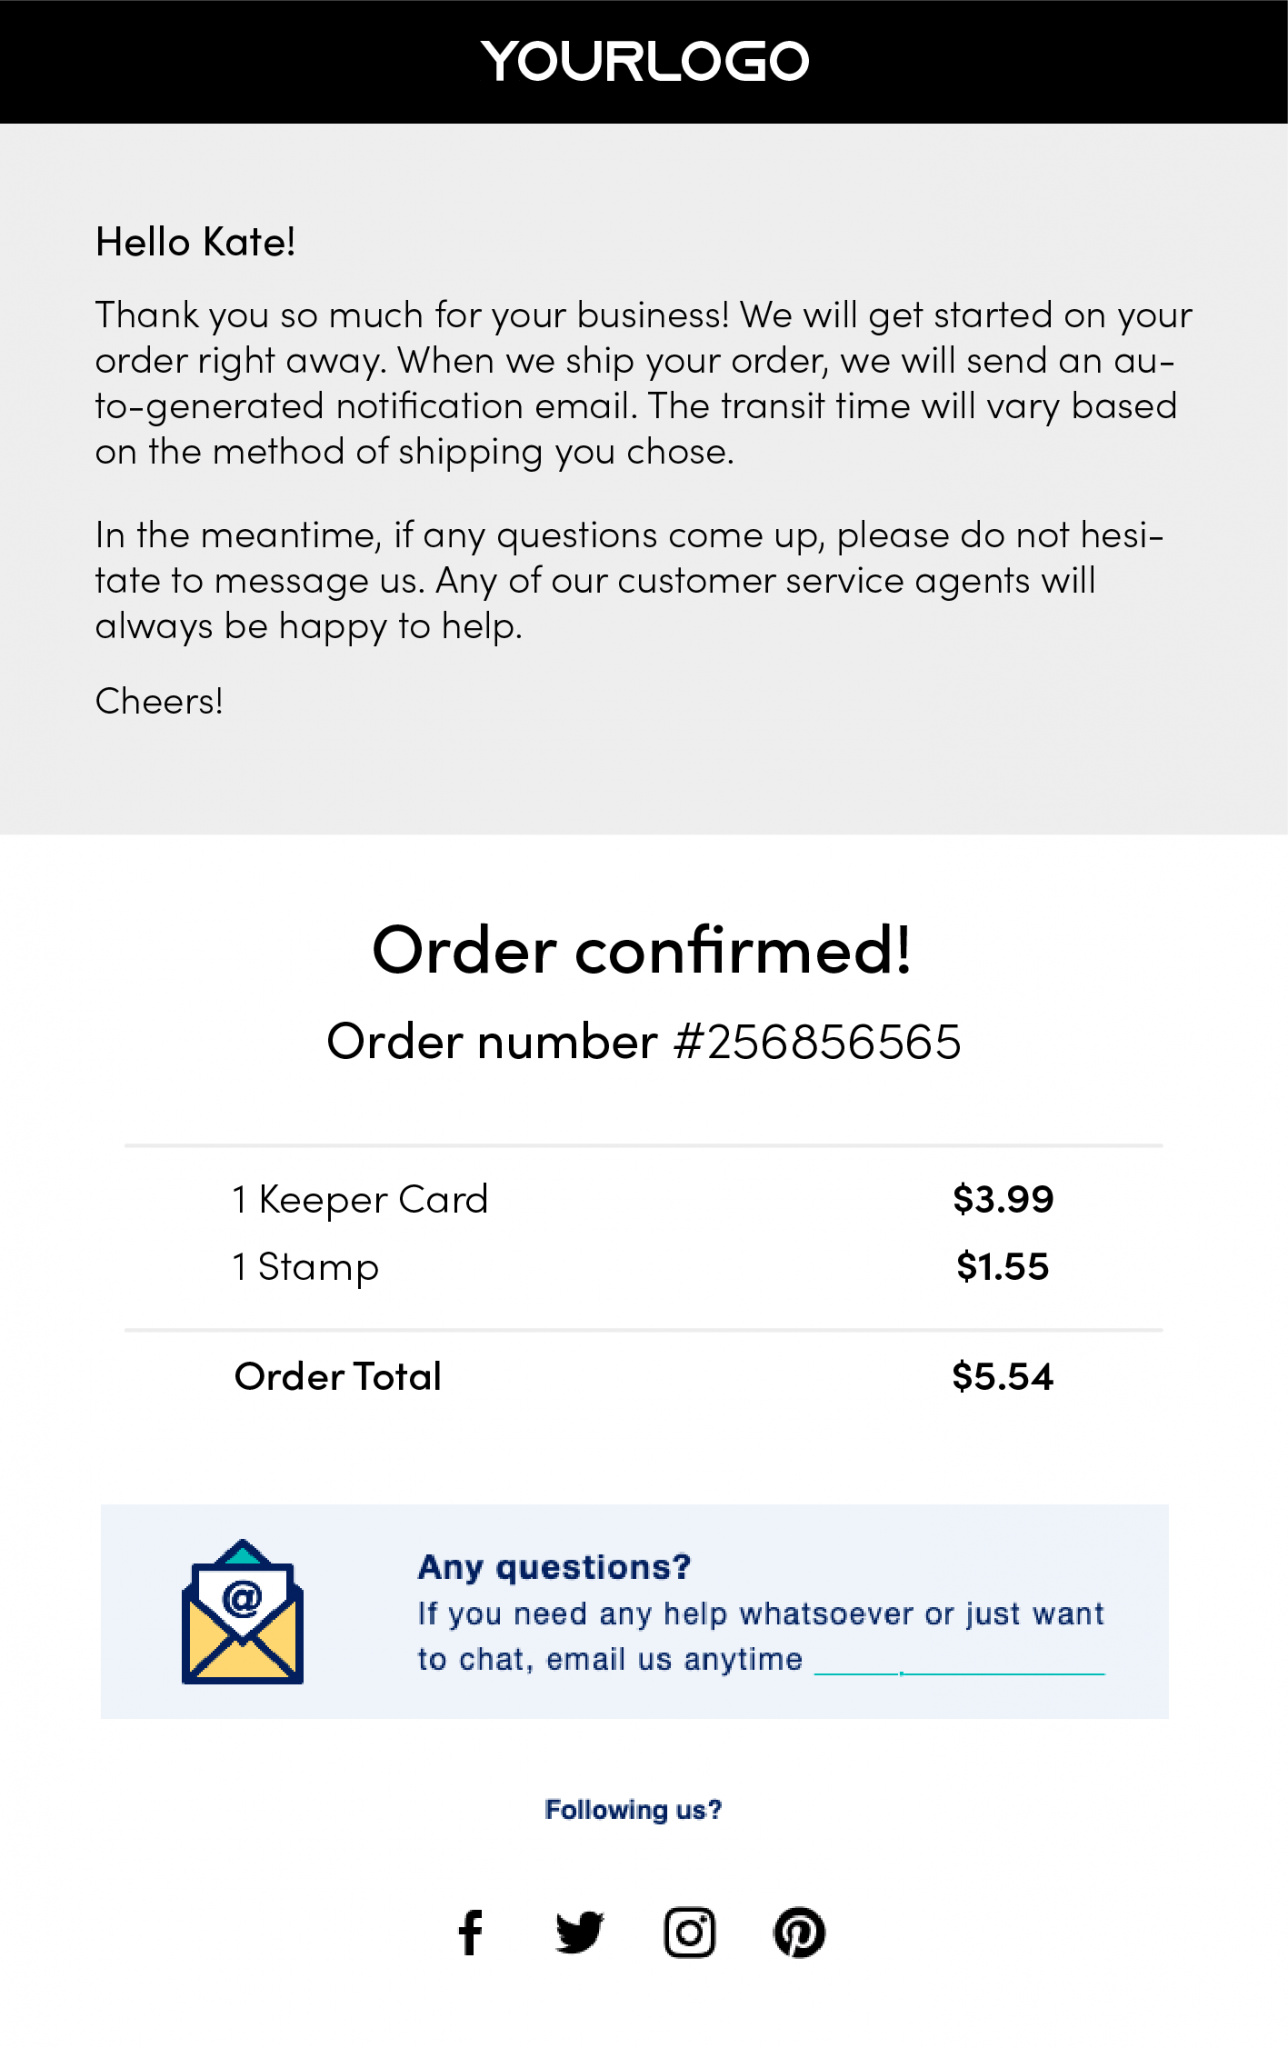 5 StealWorthy Order Confirmation Email Templates ShippingChimp Blog